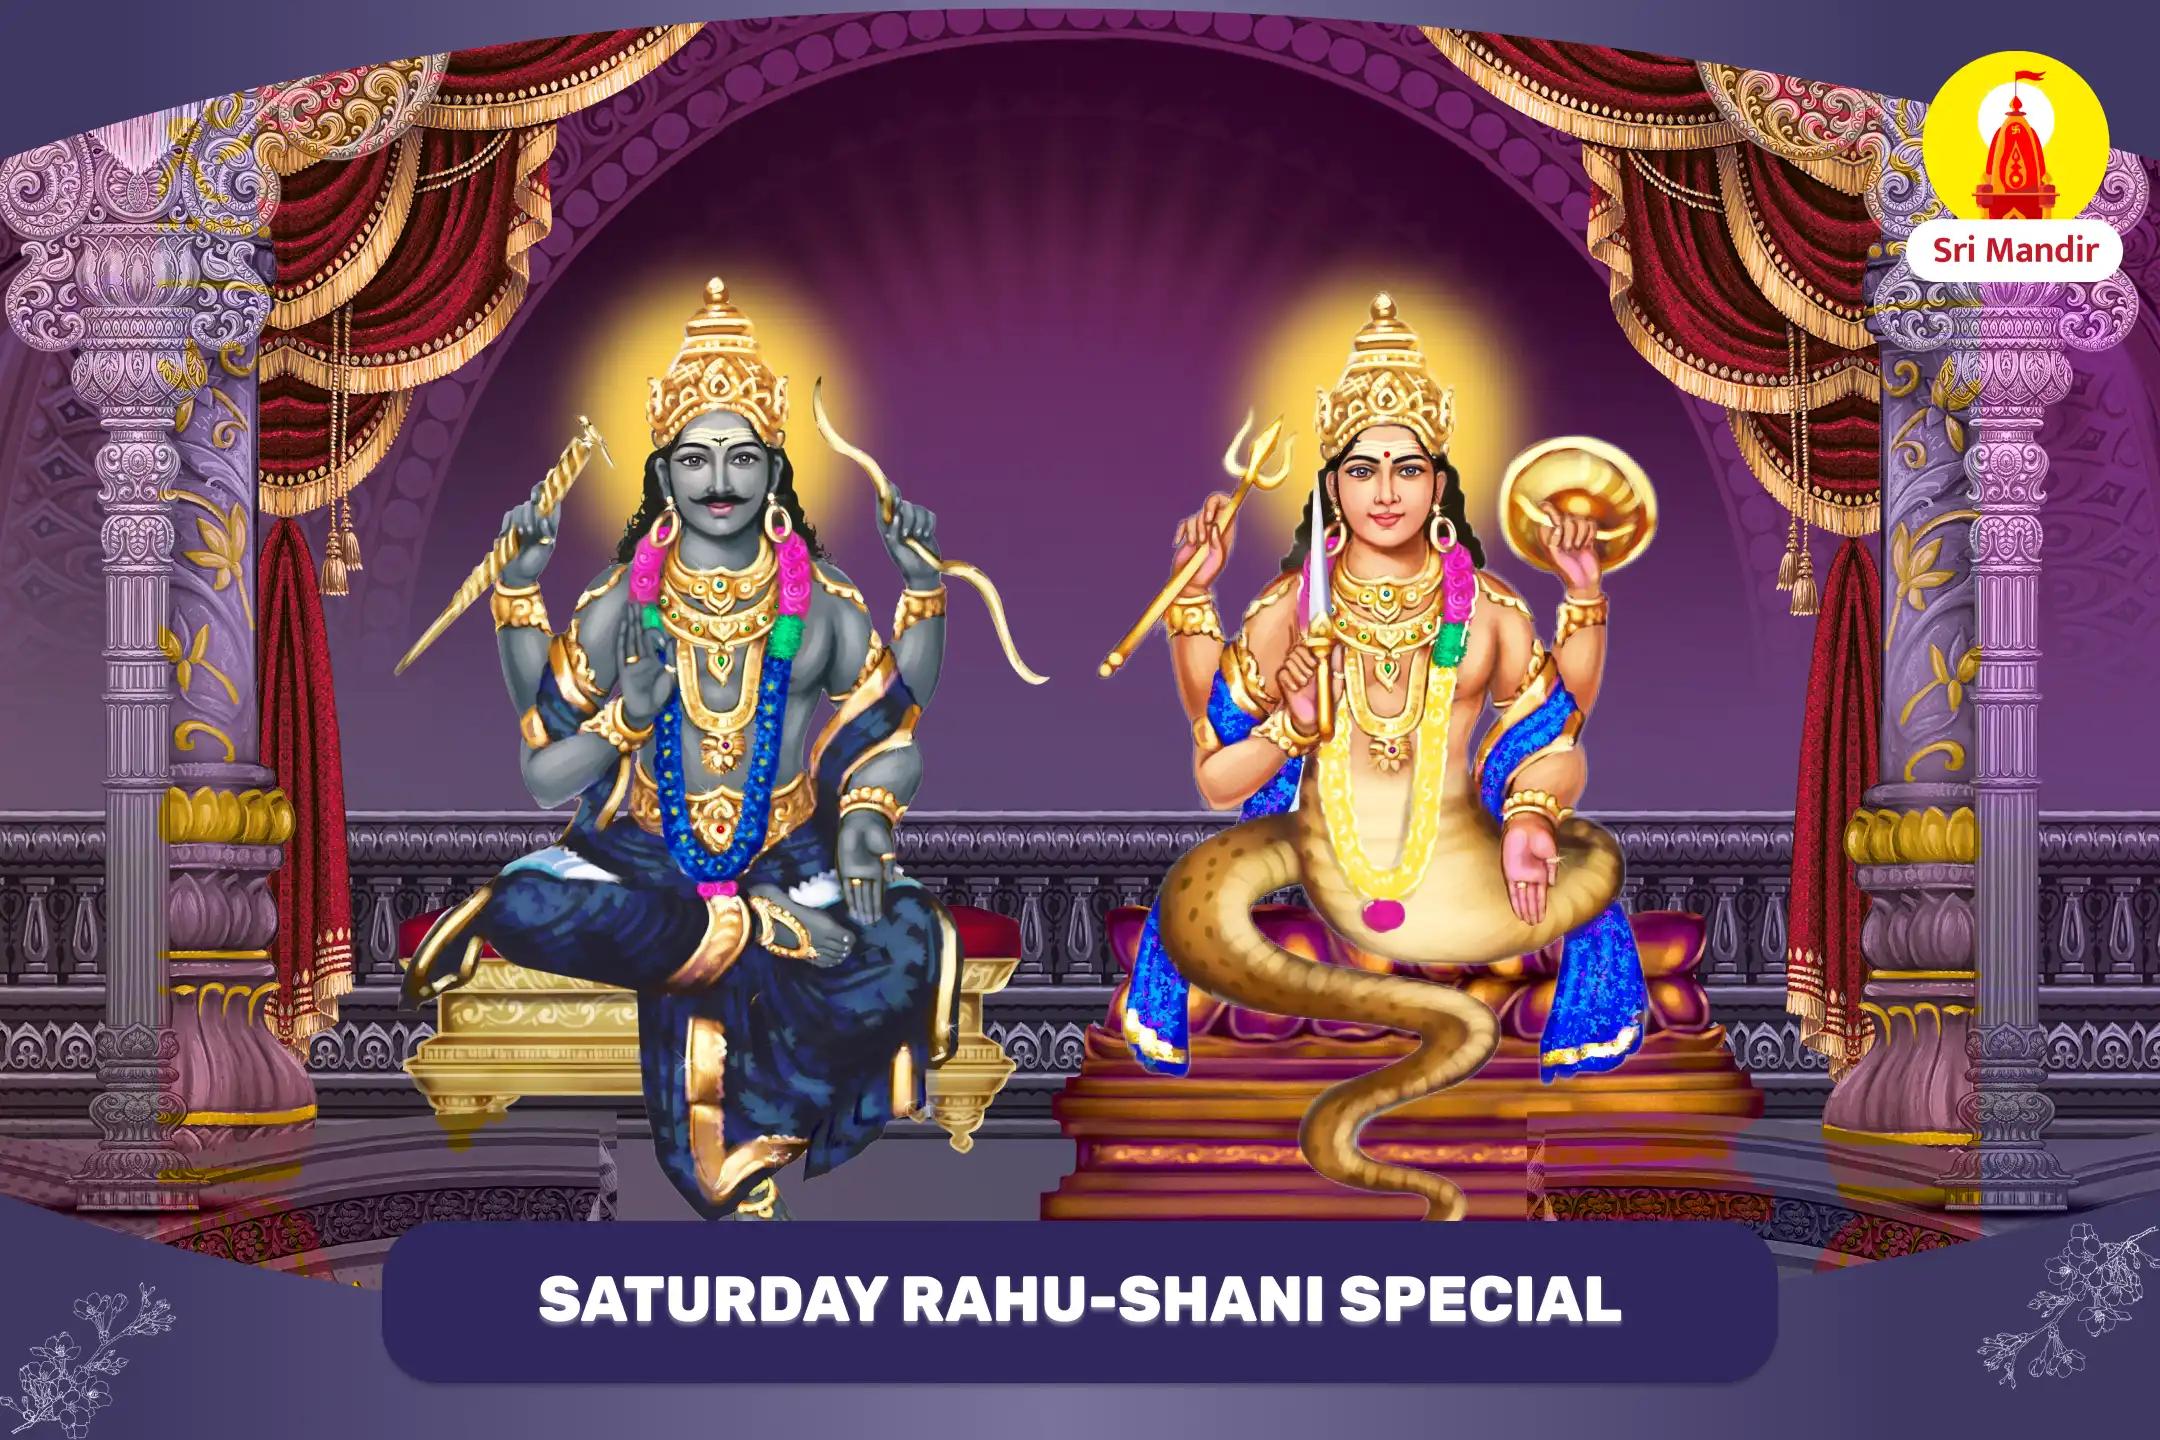  Rahu-Shani Shanti Yagya and Til Tel Abhishek for Protection from Obstacles and Delays 